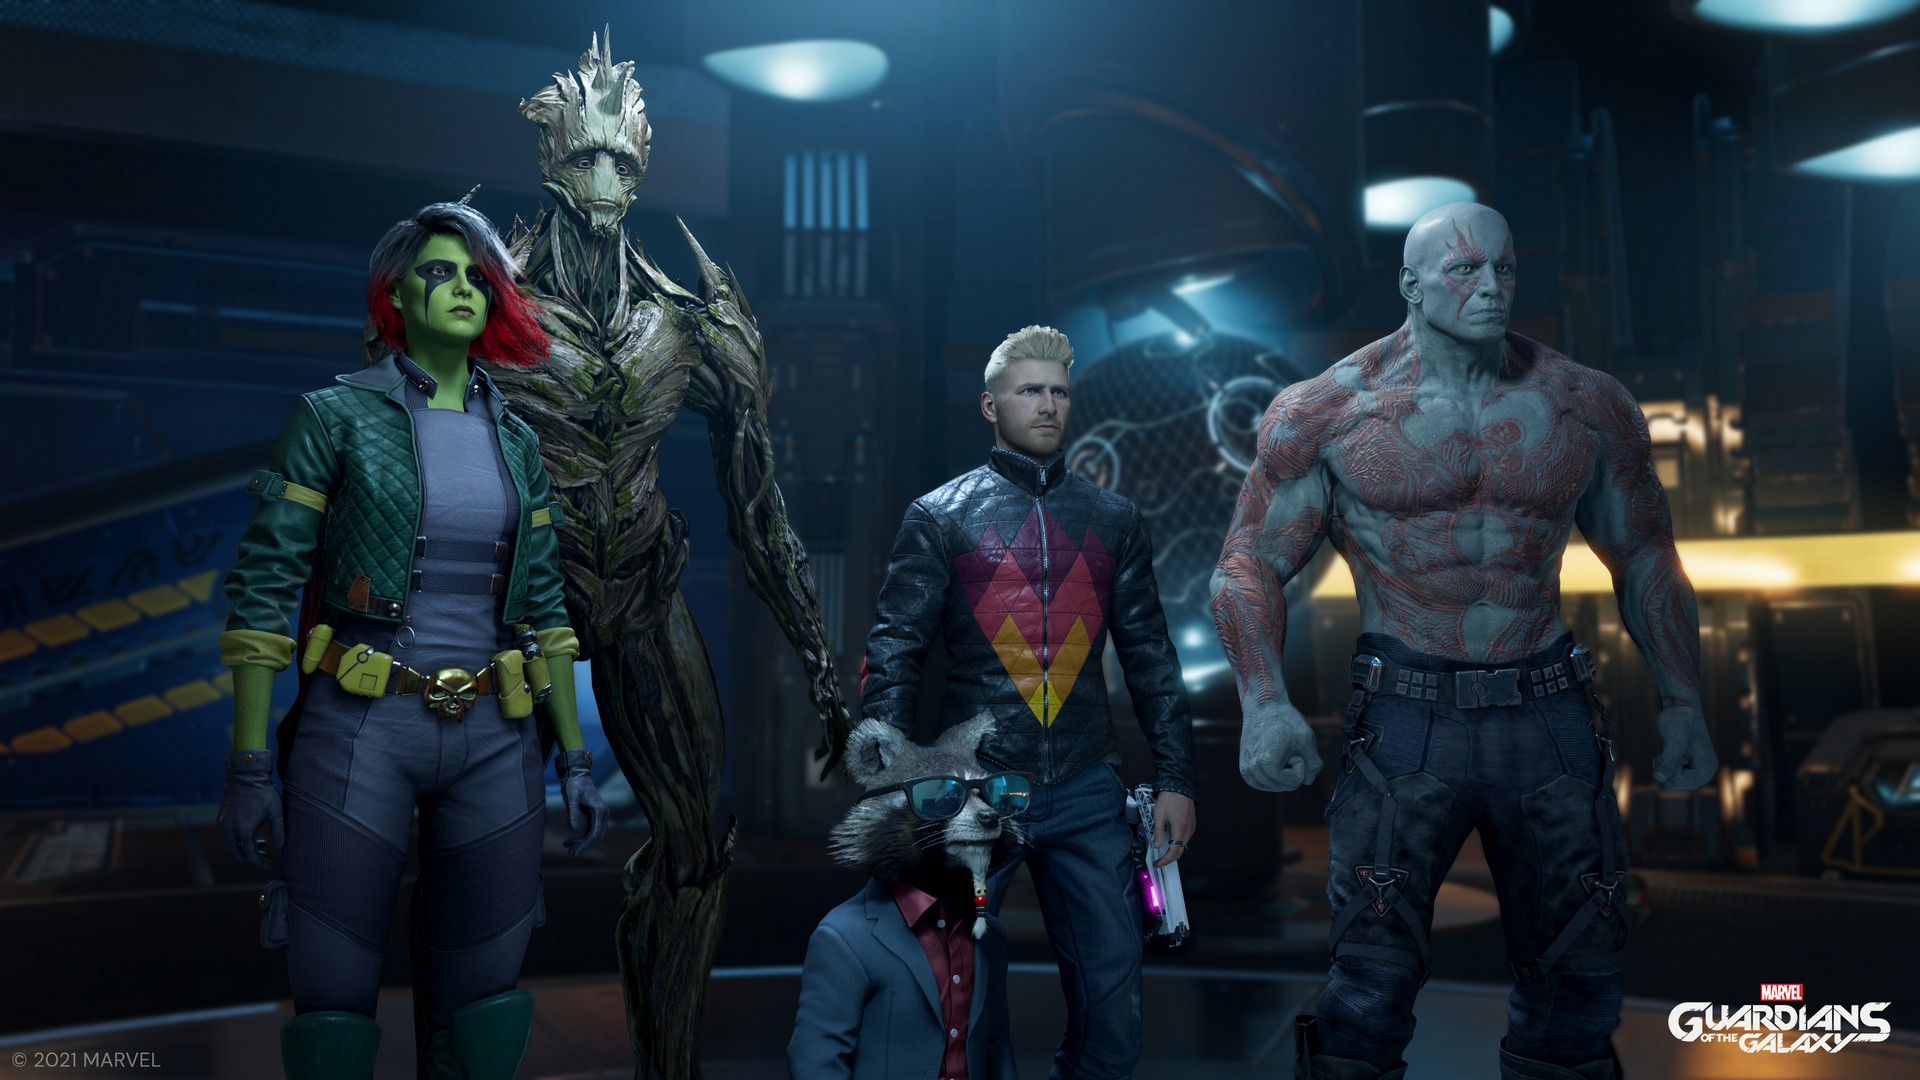 Latest Marvel’s Guardians Of The Galaxy Videos Spotlight Leadership Both In And Out Of Combat